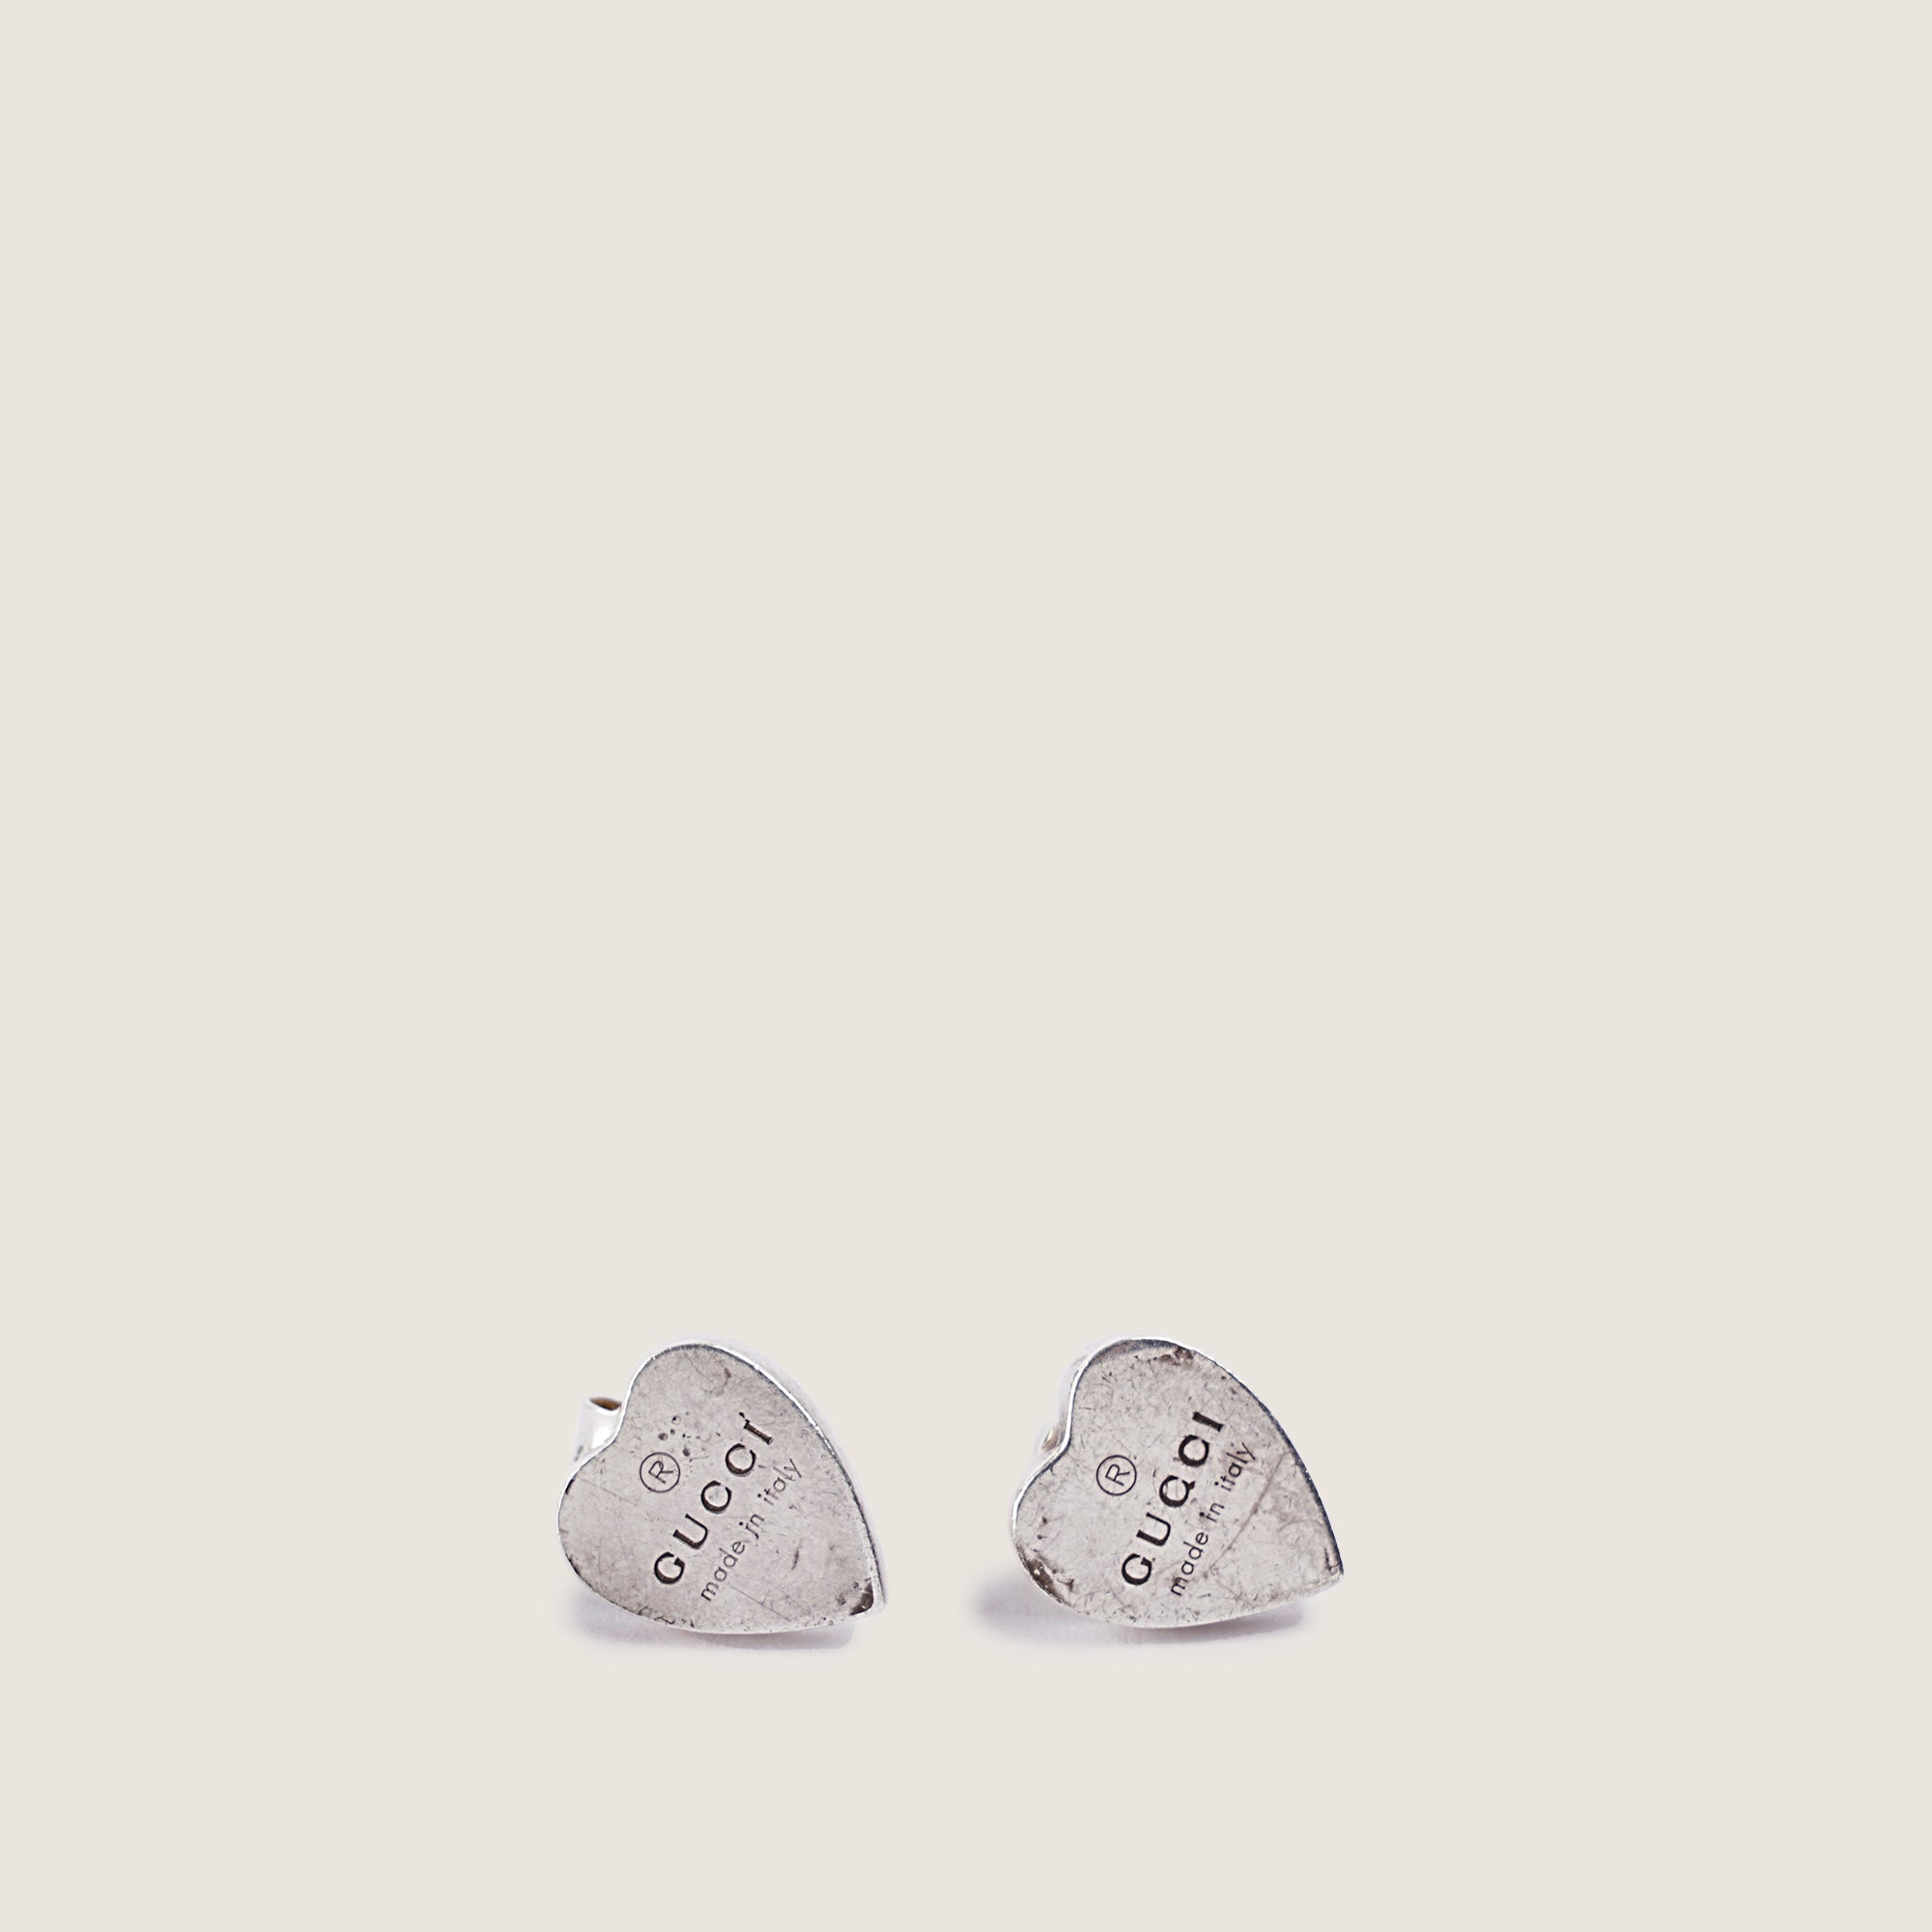 Gucci Heart Earrings Sterling Silver - GUCCI - Affordable Luxury image